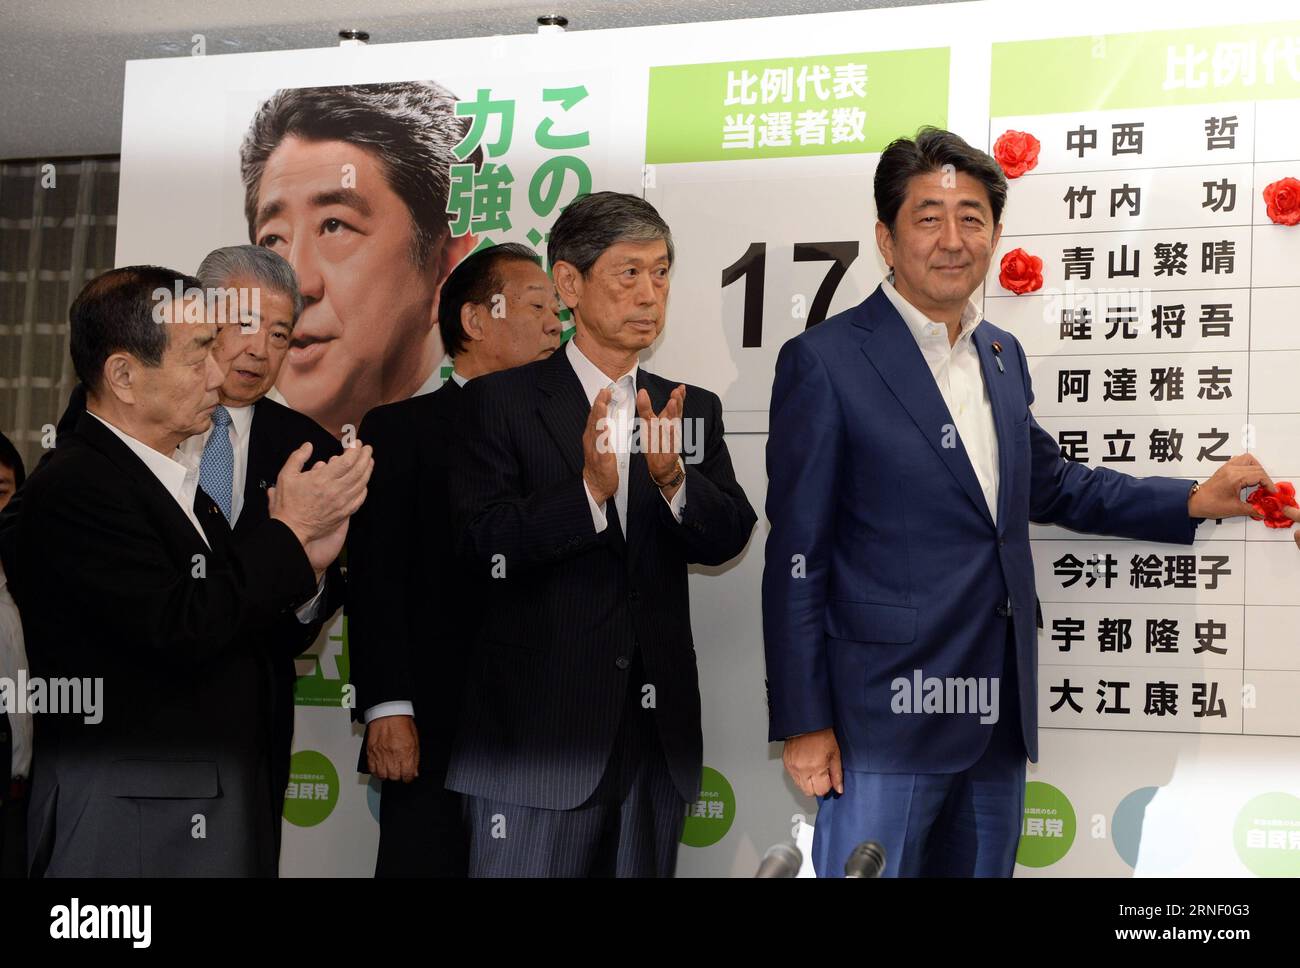 (160710) -- TOKYO, July 10, 2016 -- Japan s Prime Minister and leader of the ruling Liberal Democratic Party (LDP) Shinzo Abe (1st R) puts a rosette on the name of a candidate who is expected to win in the upper house election, at the LDP headquarters in Tokyo, Japan, July 10, 2016. The Japanese ruling camp led by Prime Minister Shinzo Abe is expected to win a majority in Sunday s upper house election, according to exit polls by local media. ) JAPAN-TOKYO-UPPER HOUSE ELECTION-RULING CAMP MaxPing PUBLICATIONxNOTxINxCHN   160710 Tokyo July 10 2016 Japan S Prime Ministers and Leader of The ruling Stock Photo